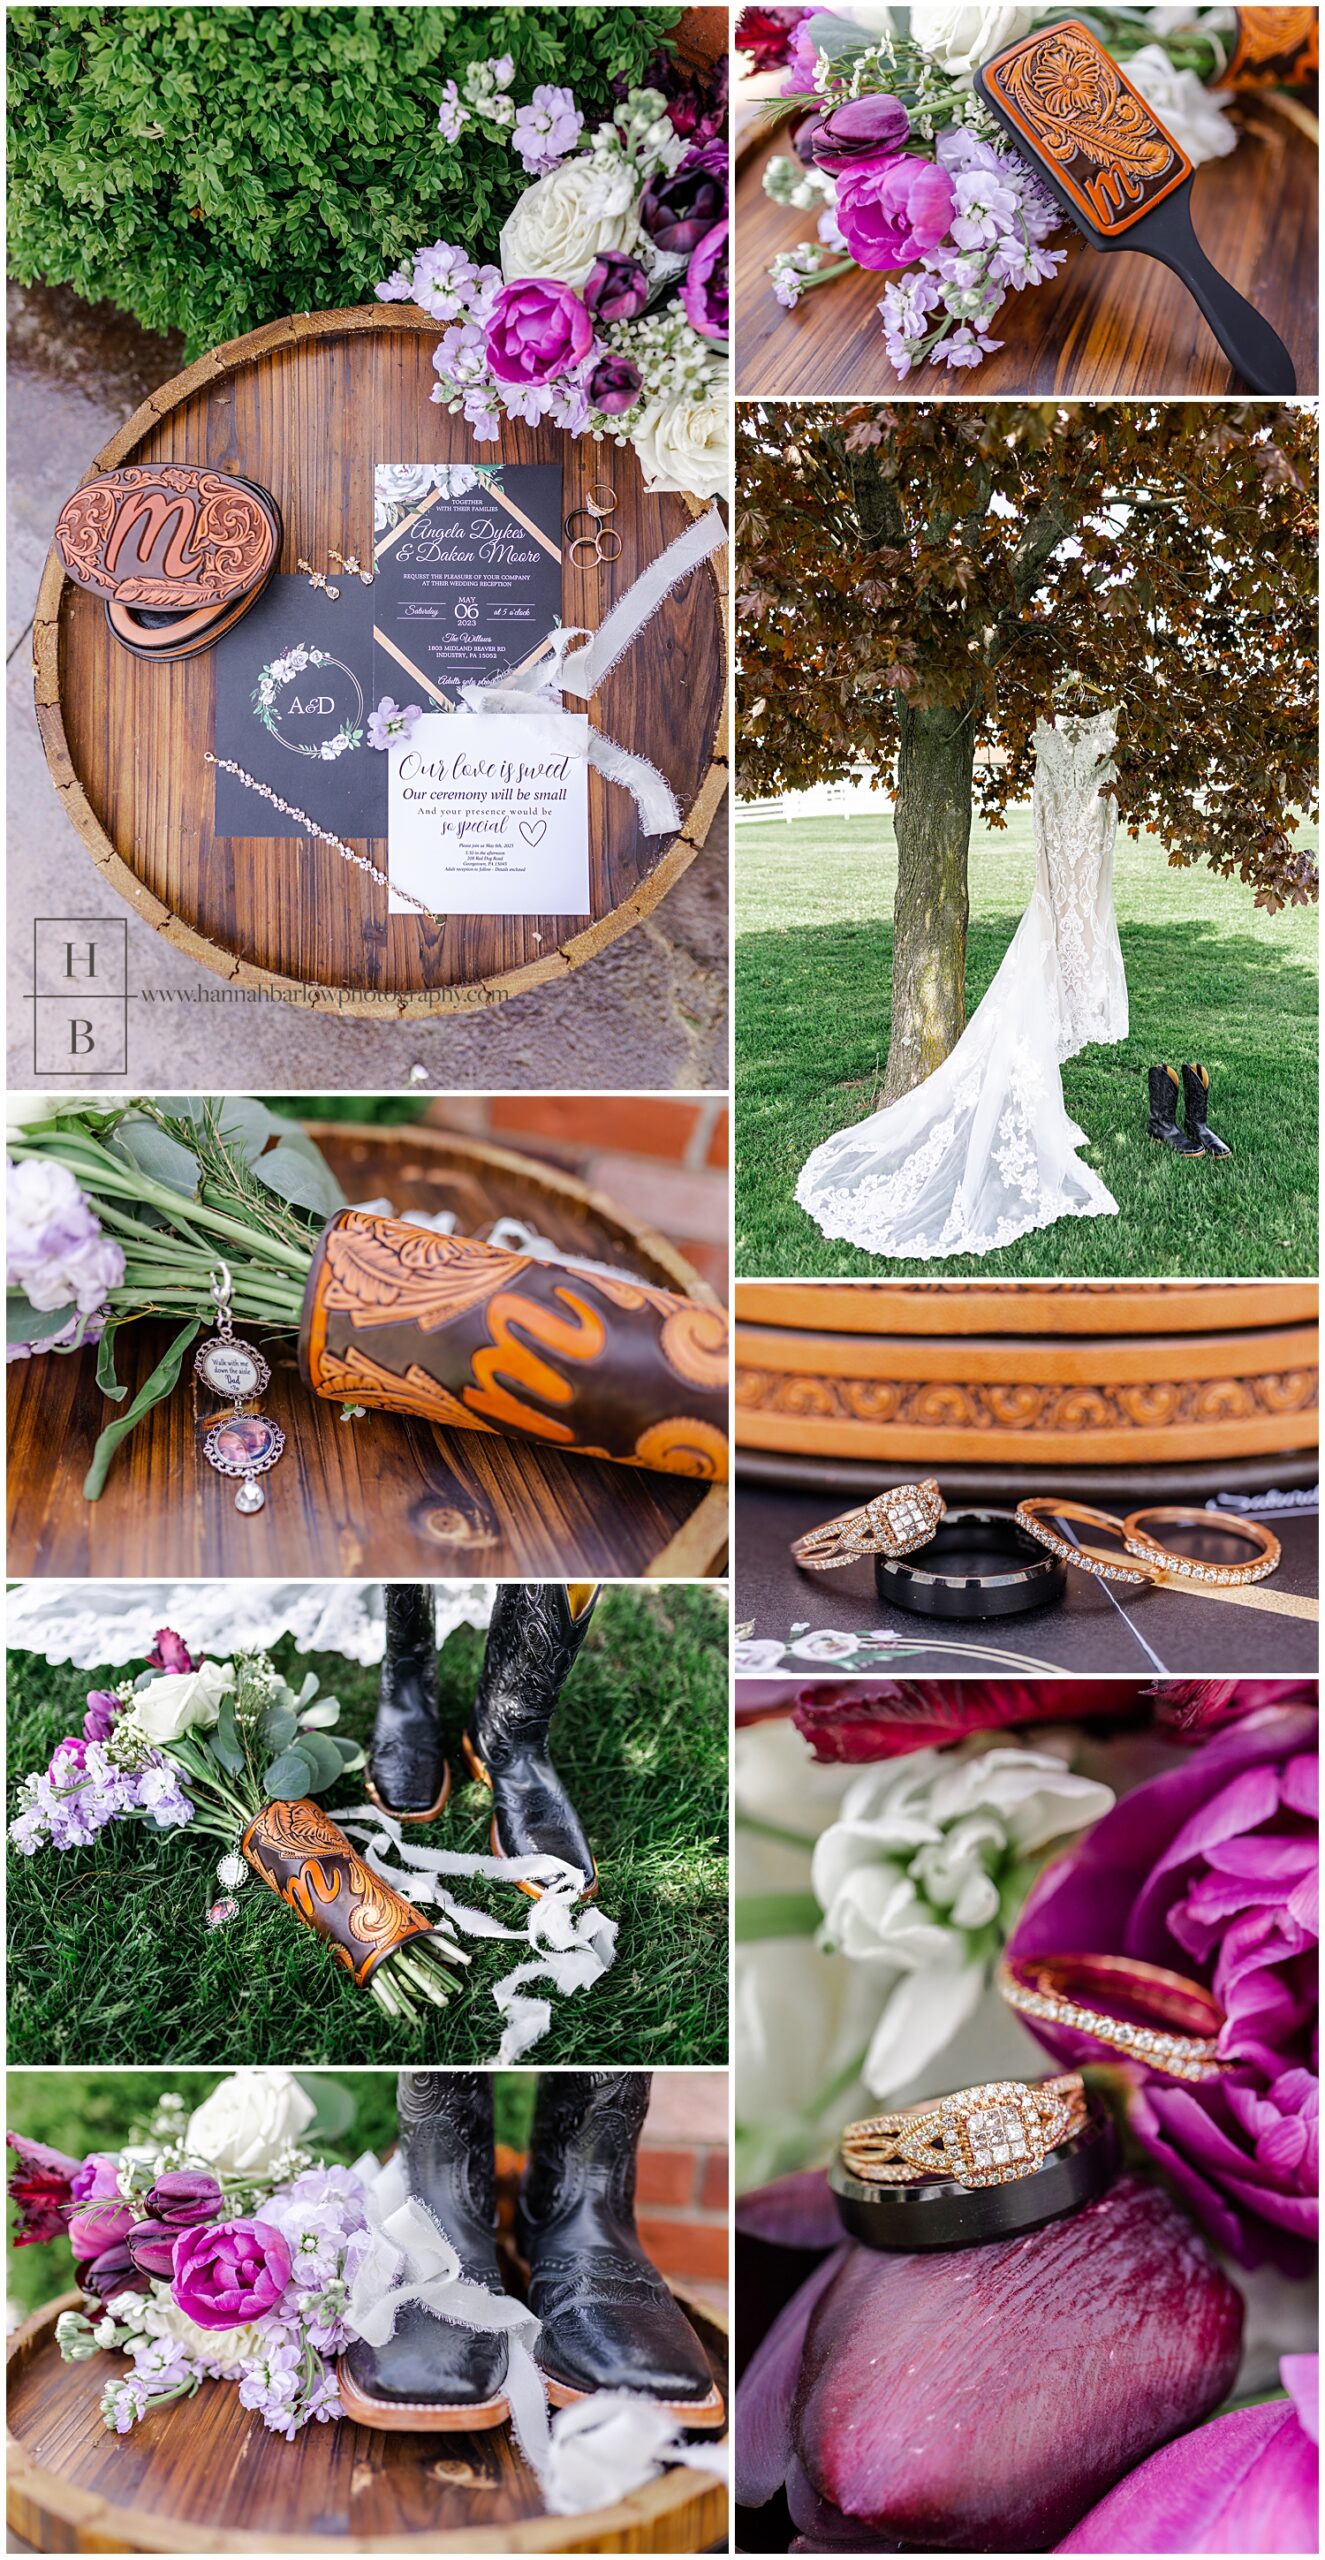 Collage of rustic wedding bridal details with purple flowers and leather accents.